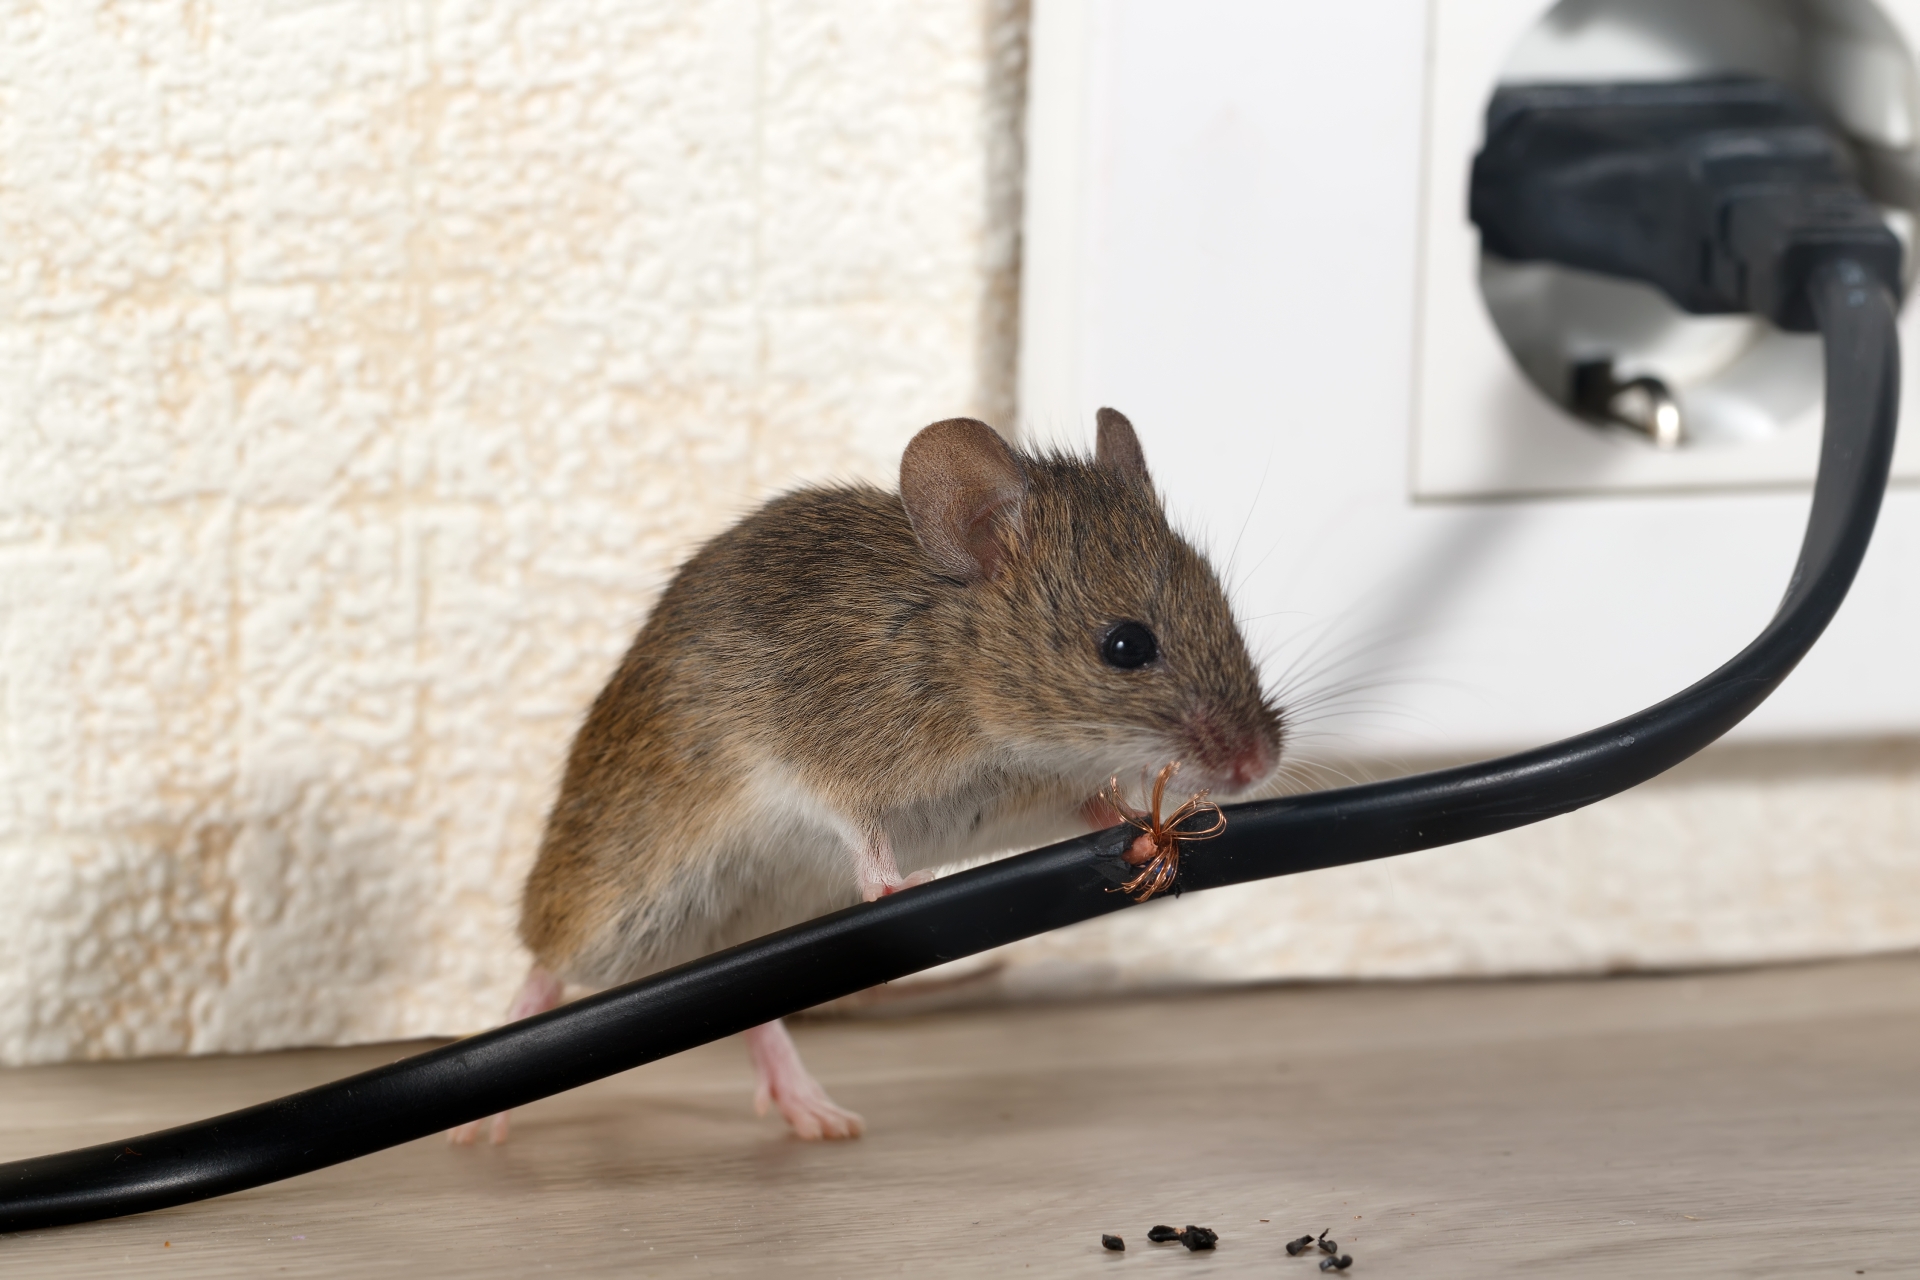 Mice Infestation, Pest Control in Isleworth, TW7. Call Now 020 8166 9746